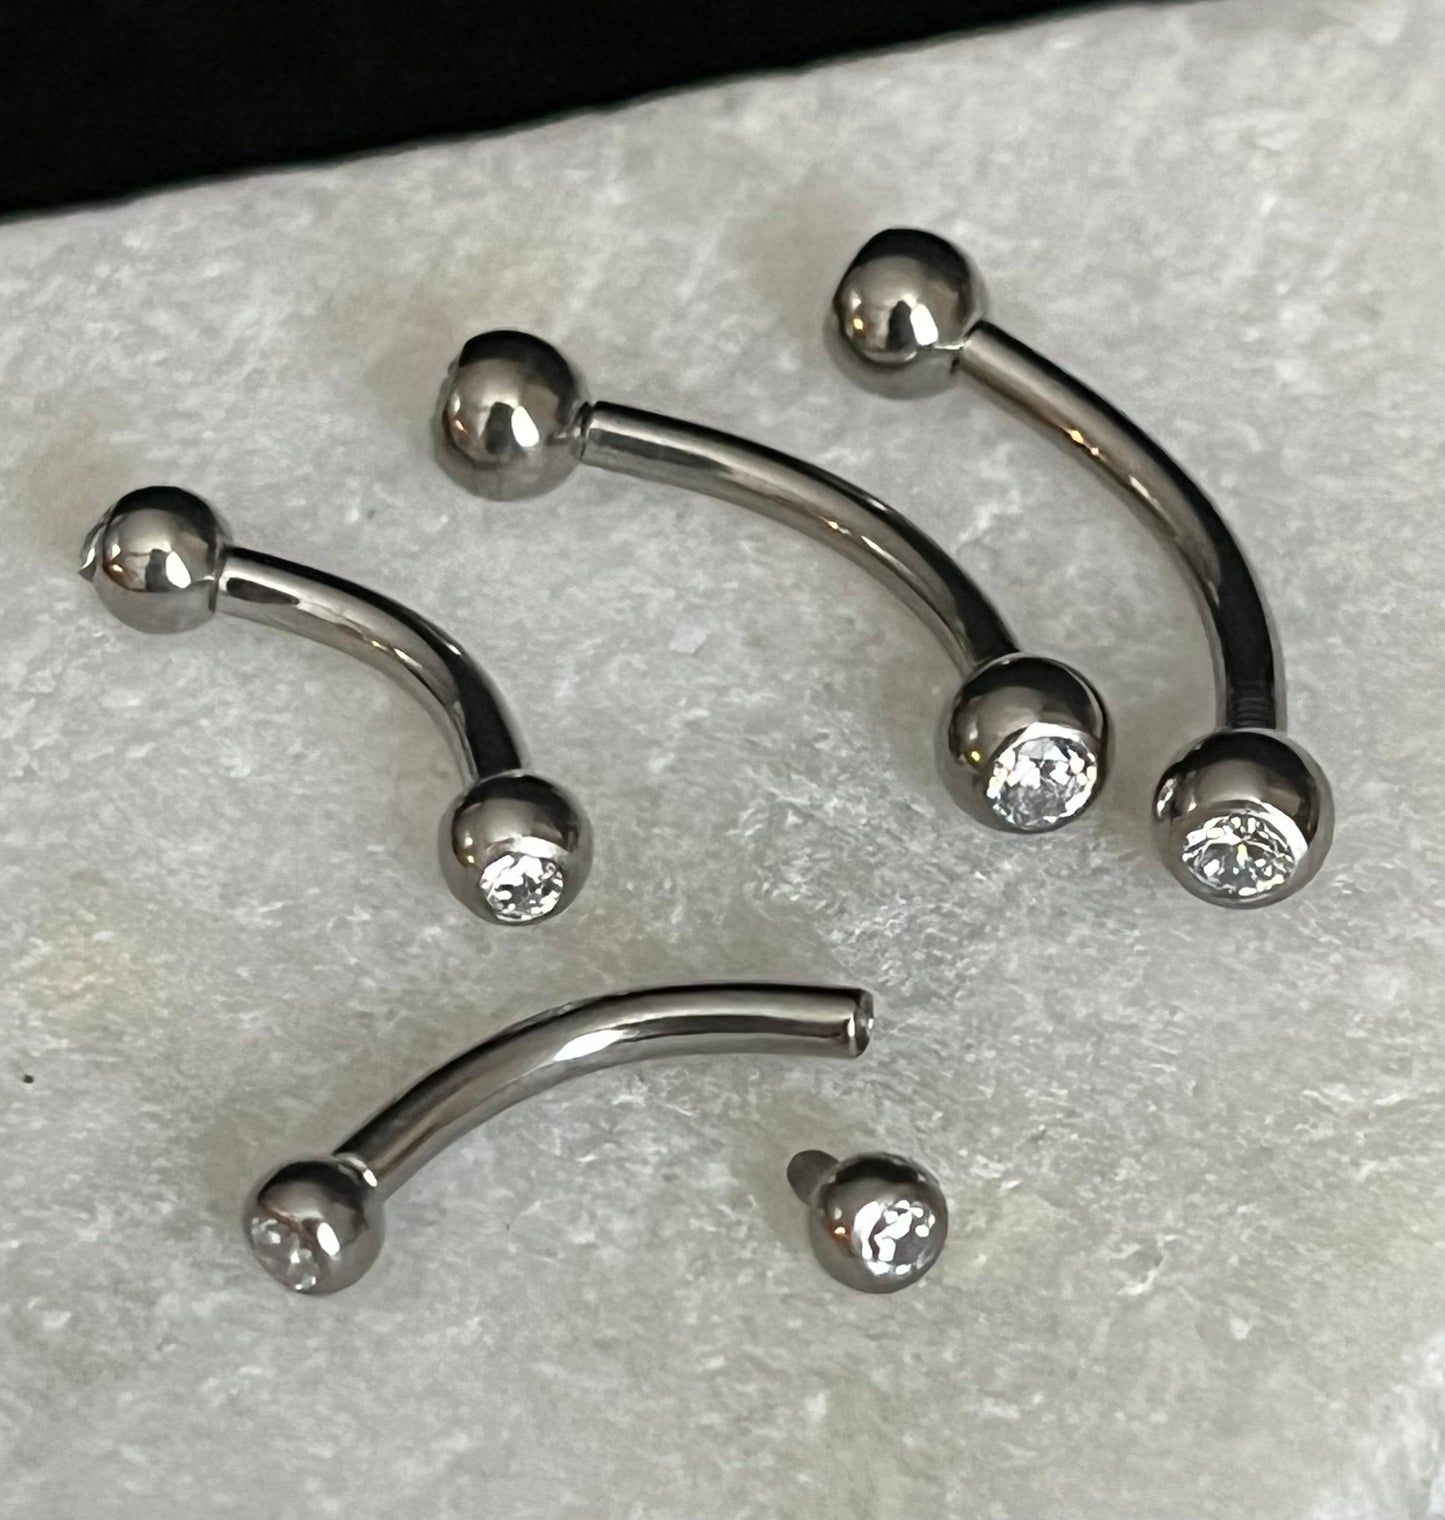 1 Piece Gemmed Internally Threaded G23 Solid Titanium Curved Barbell Eyebrow Ring - 16g or 14g - 6mm, 8mm, 10mm, 11mm & 12mm Available !